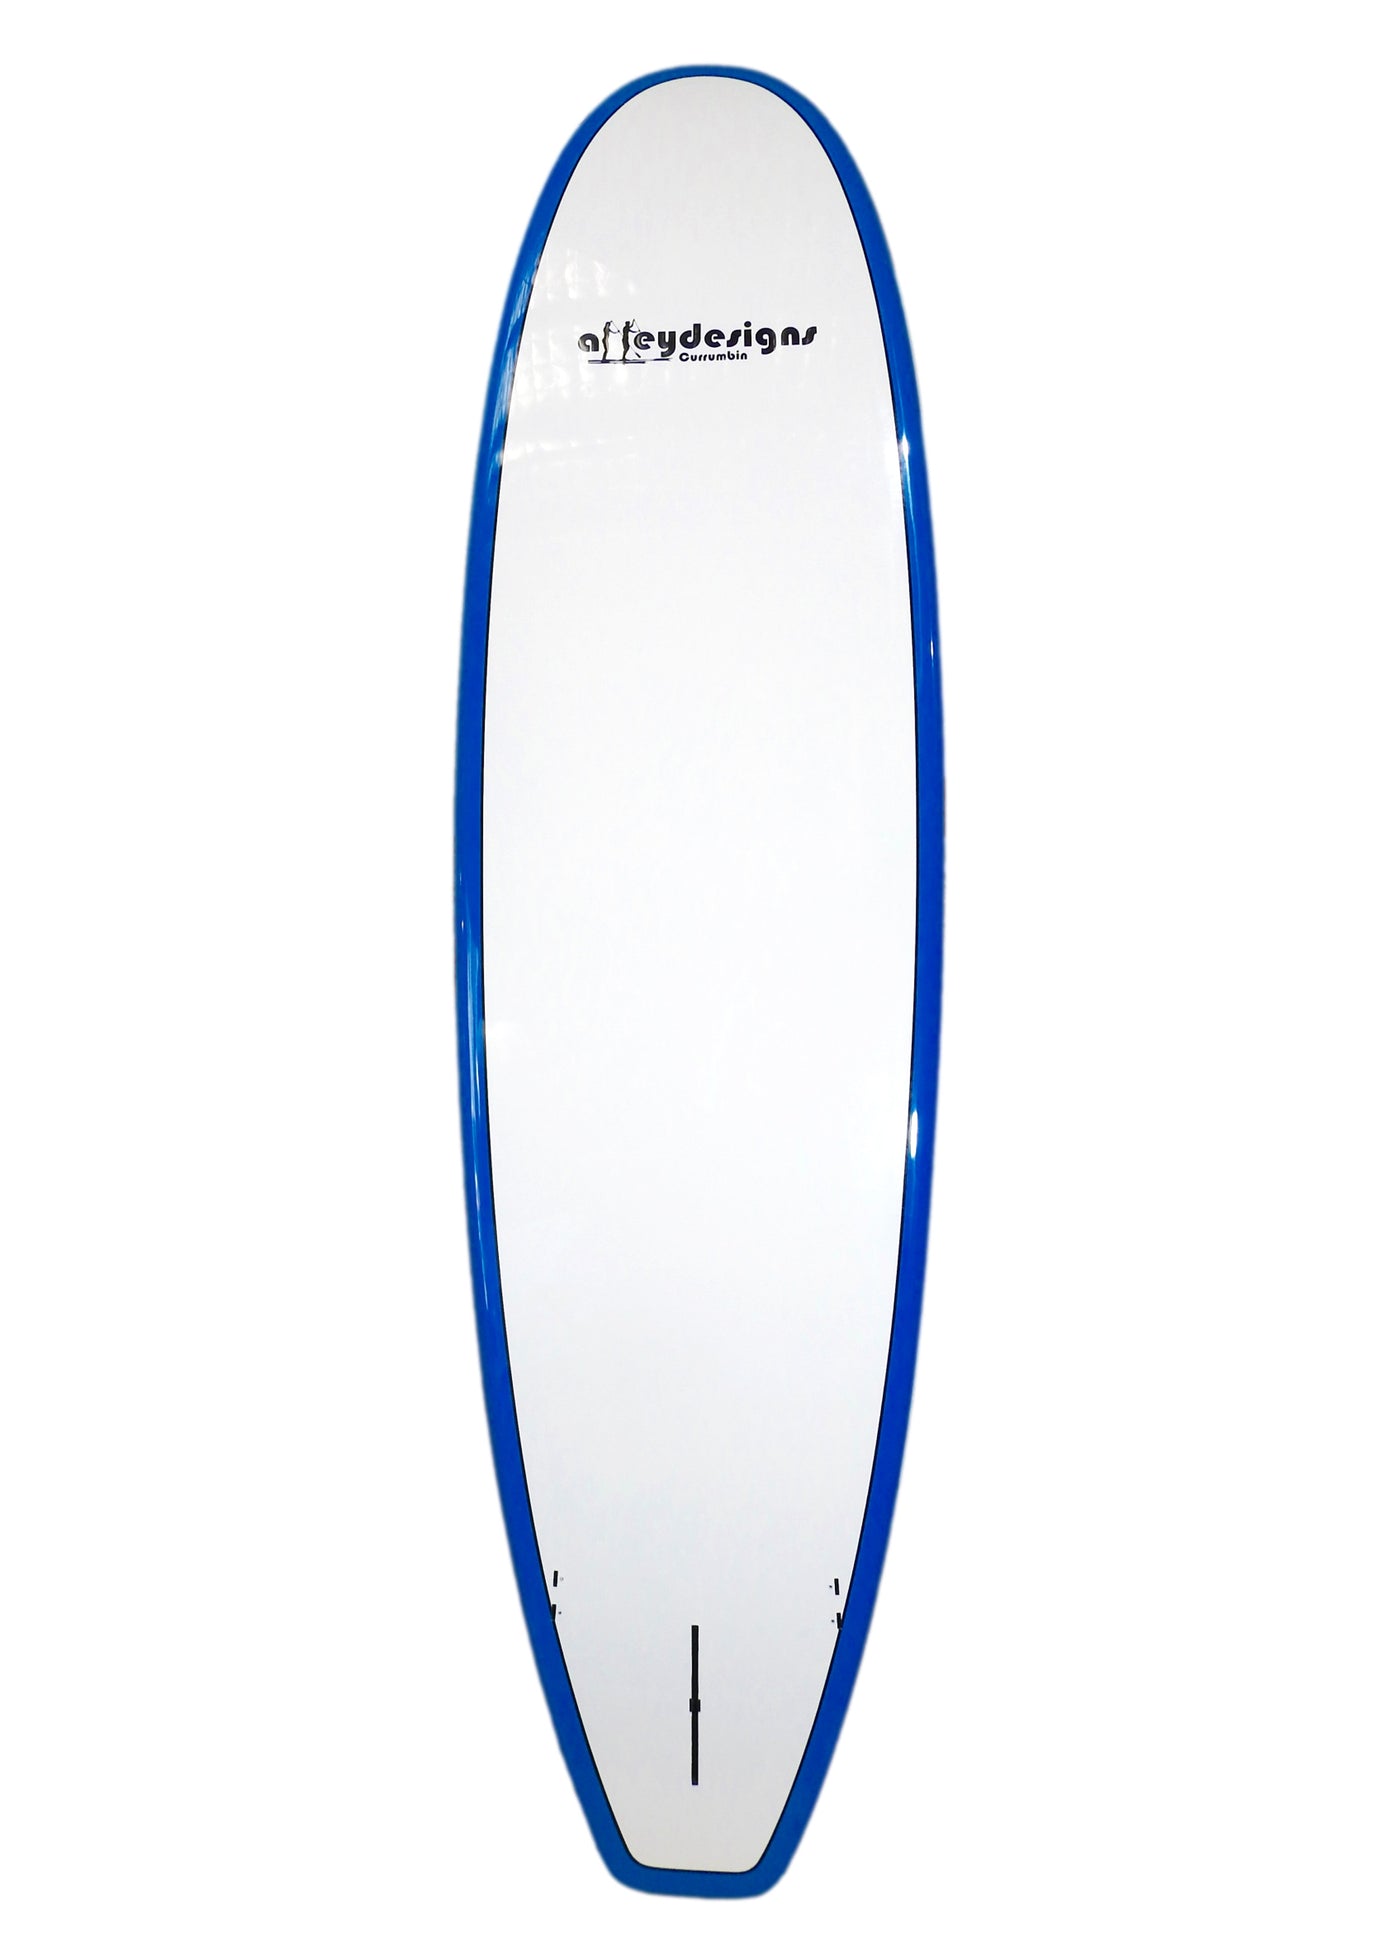 10’6” x 32”  Blue Timber Look Alleydesigns  Family SUP 200L - Alleydesigns  Pty Ltd                                             ABN: 44165571264